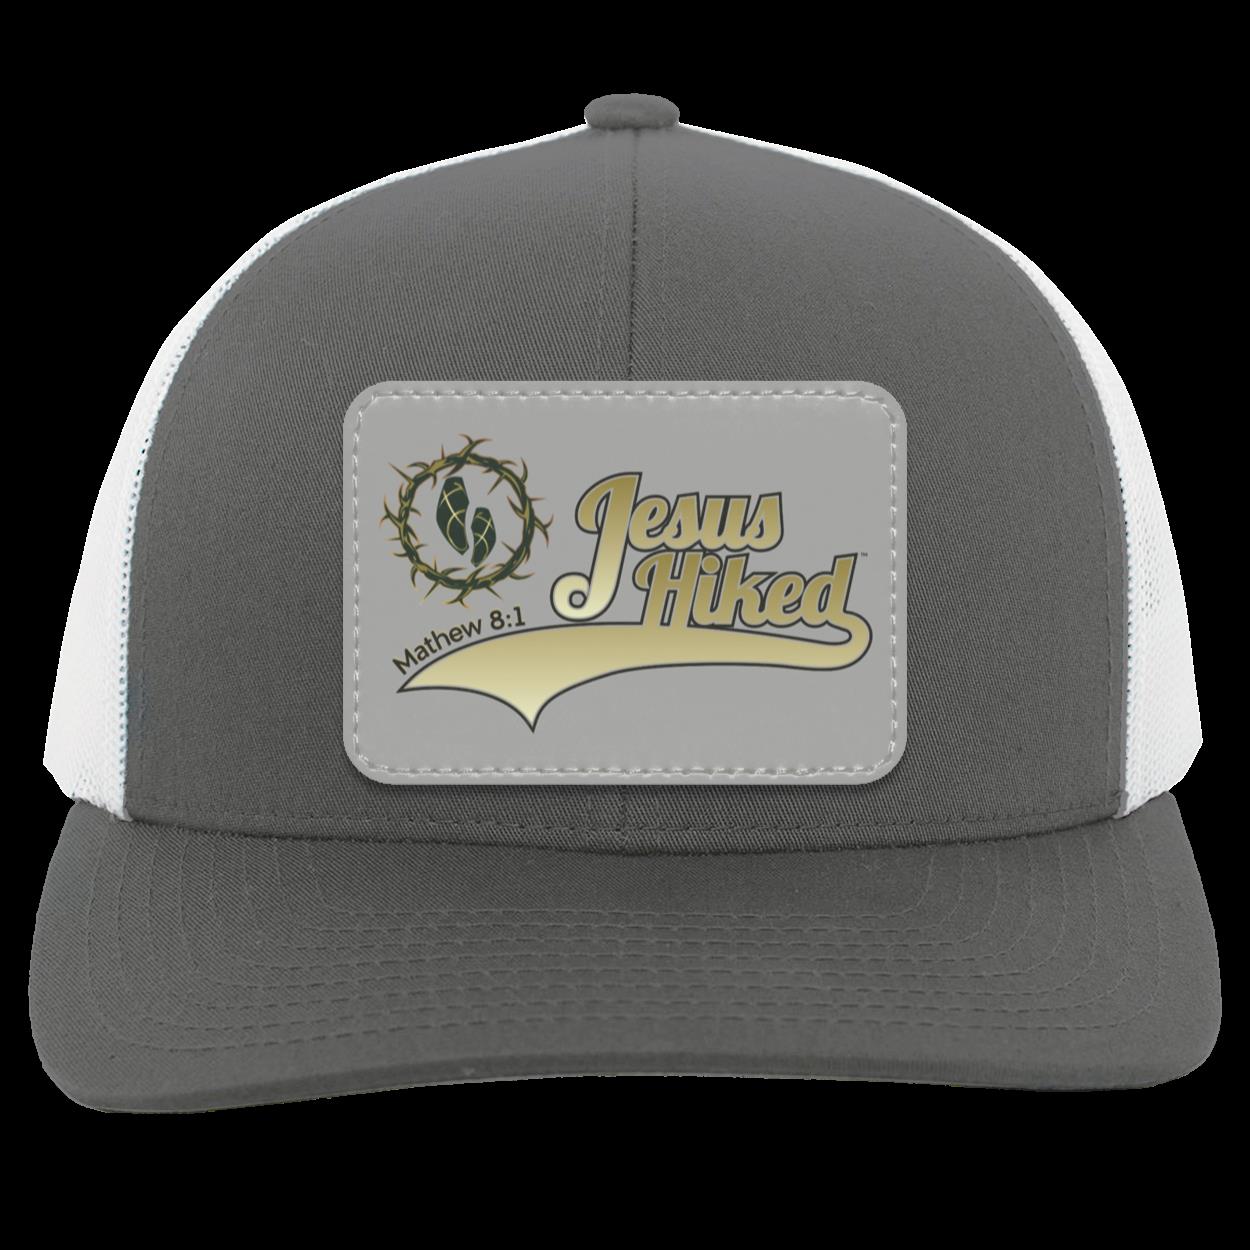 Just Hike Trucker Snap Back - Rectangle Patch